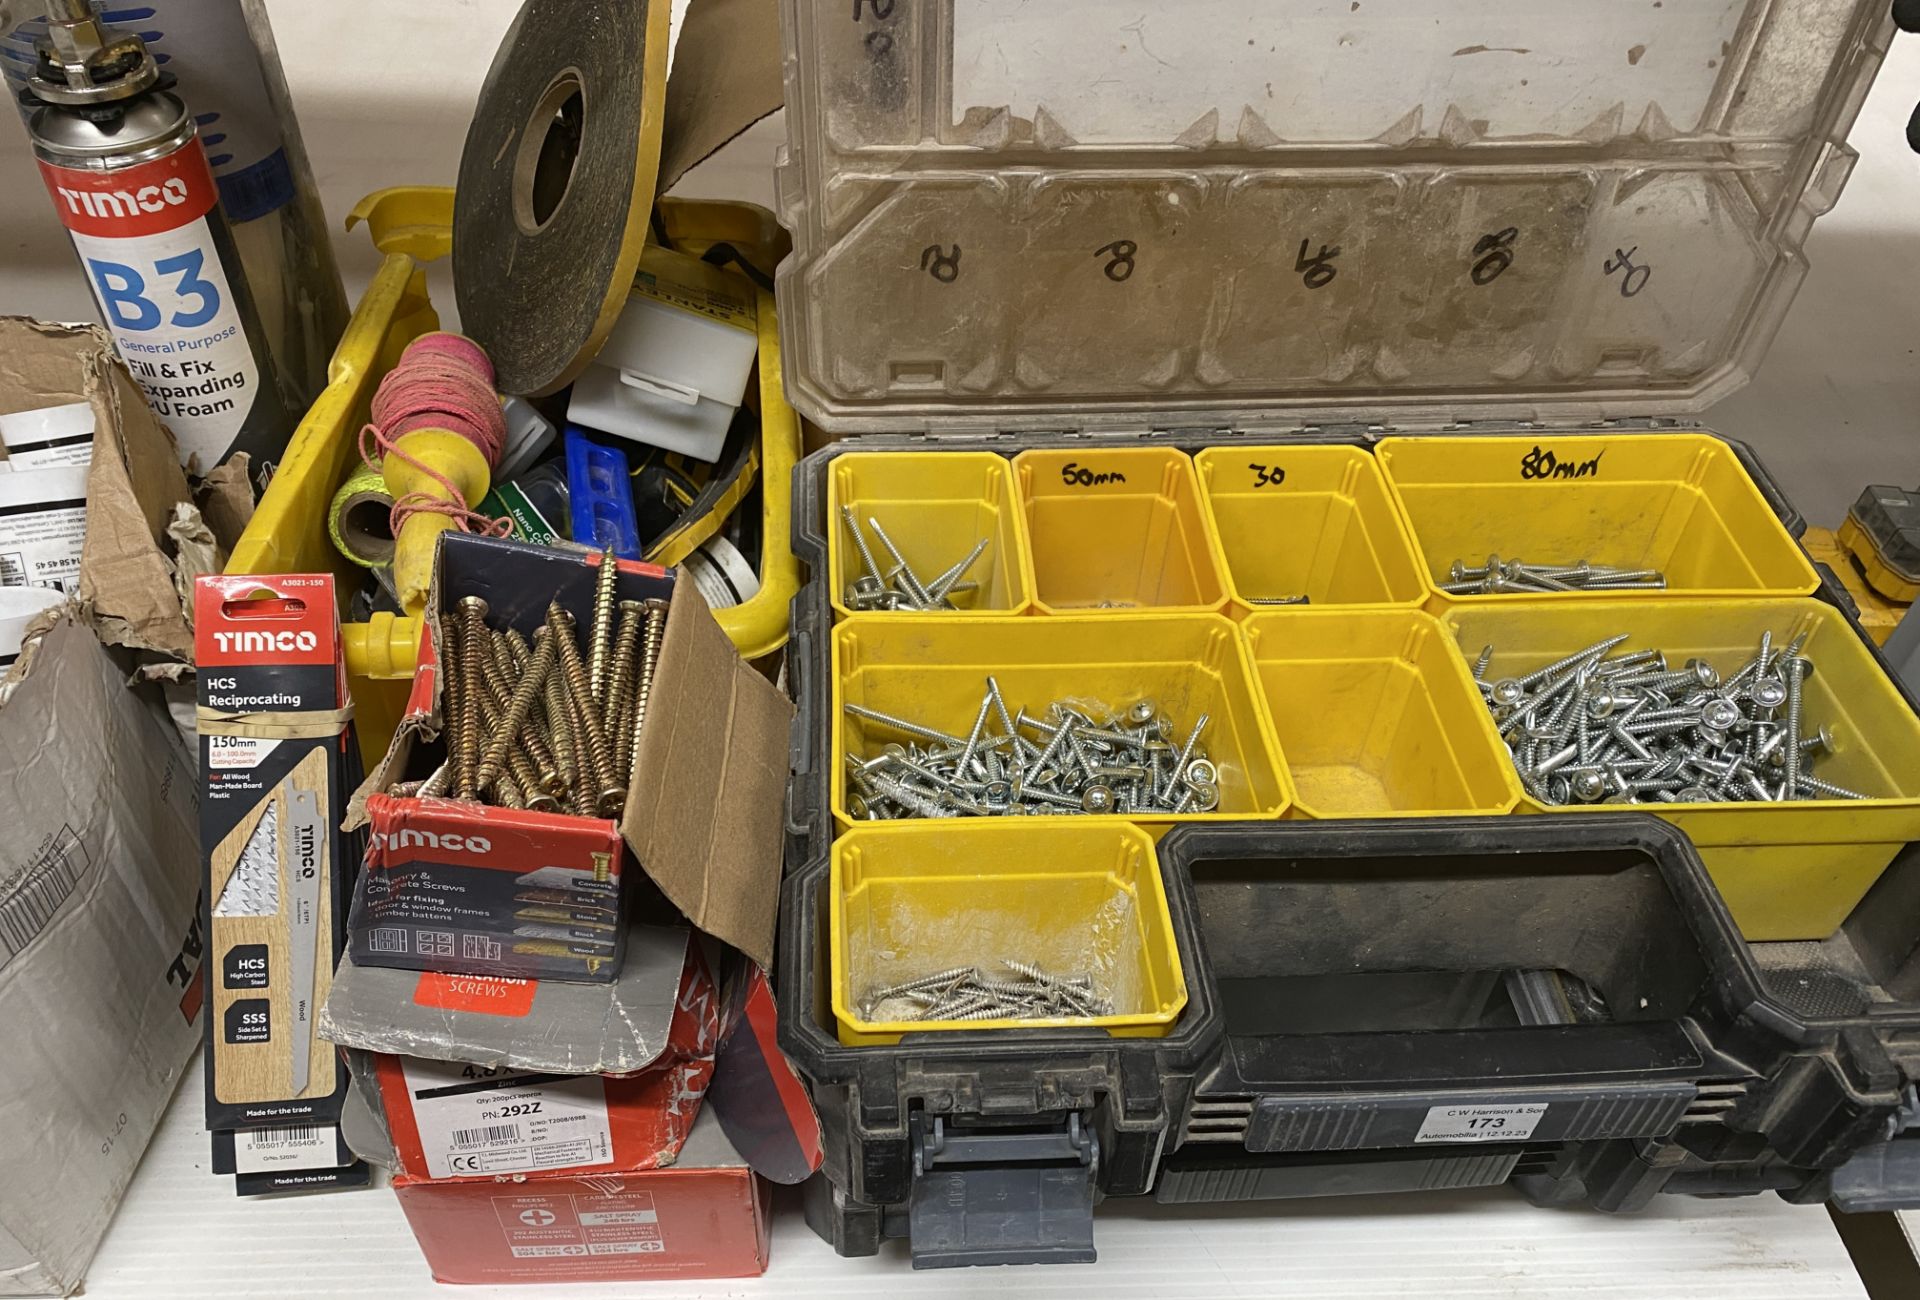 2 x Stanley Fatmax storage boxes and contents - nails and screws, tubes silirub silicone, - Image 2 of 3